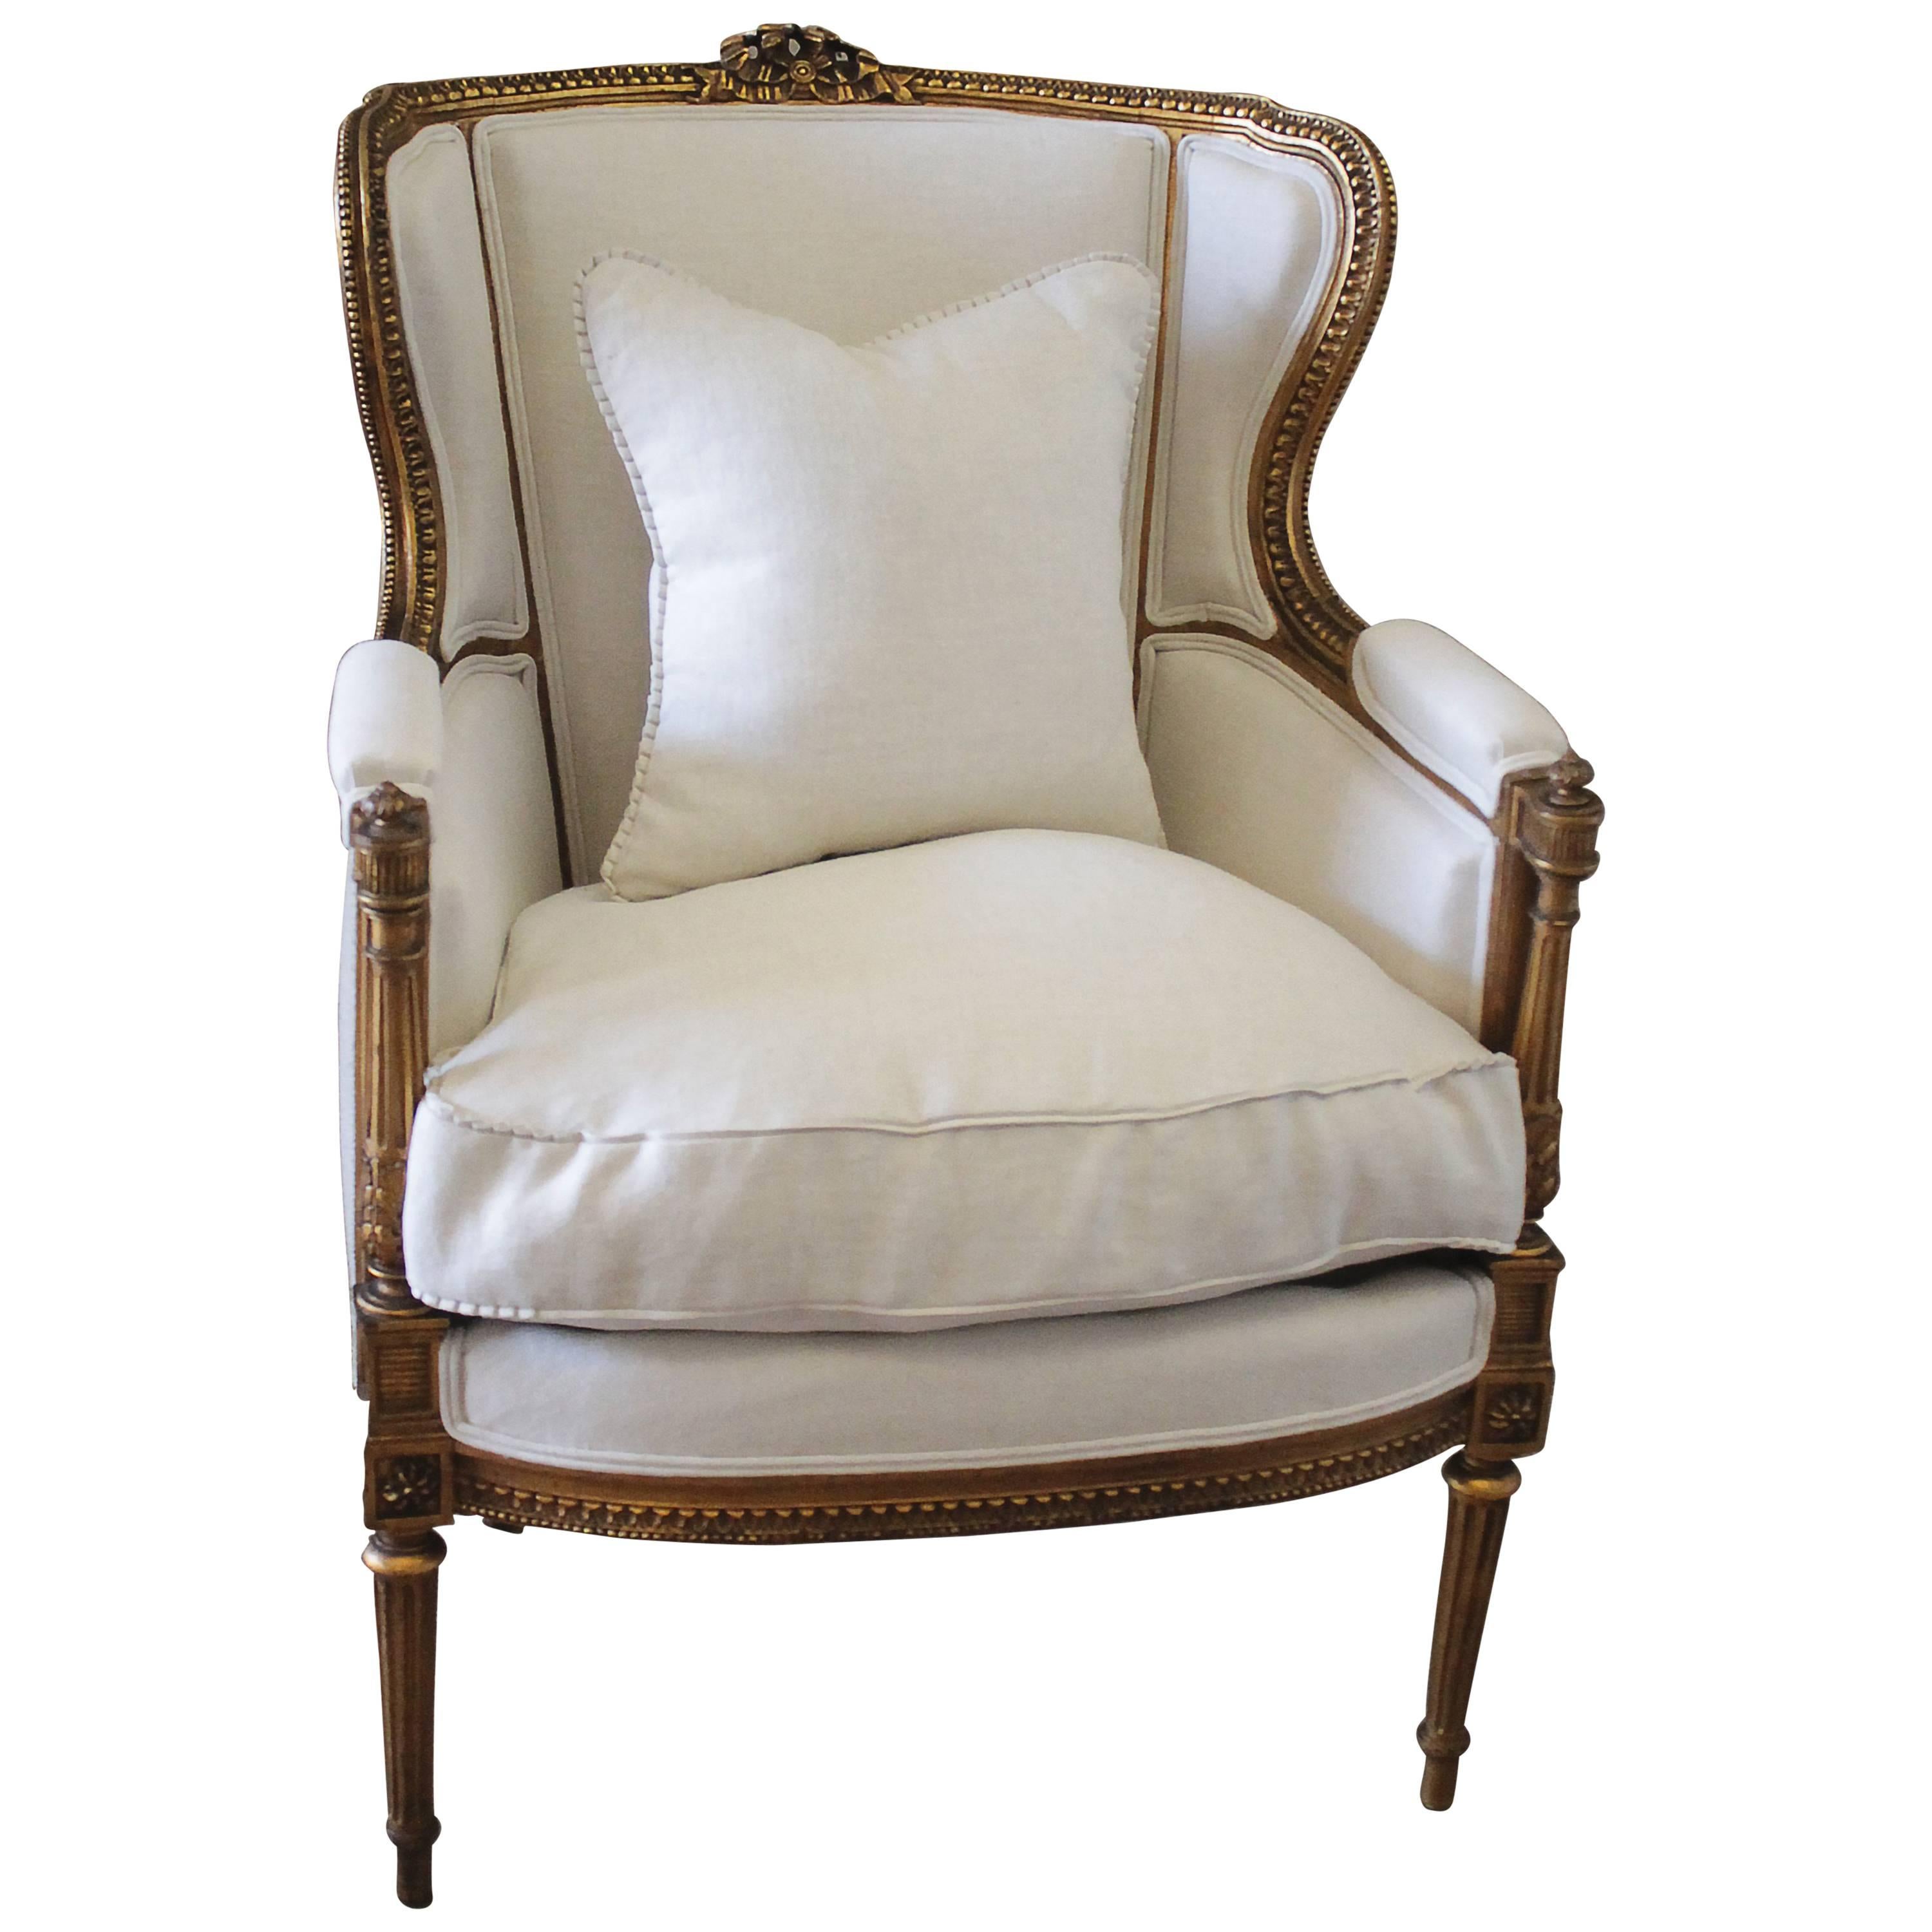 Antique Louis XVI Style Gilt French Wing Chair with Linen Upholstery